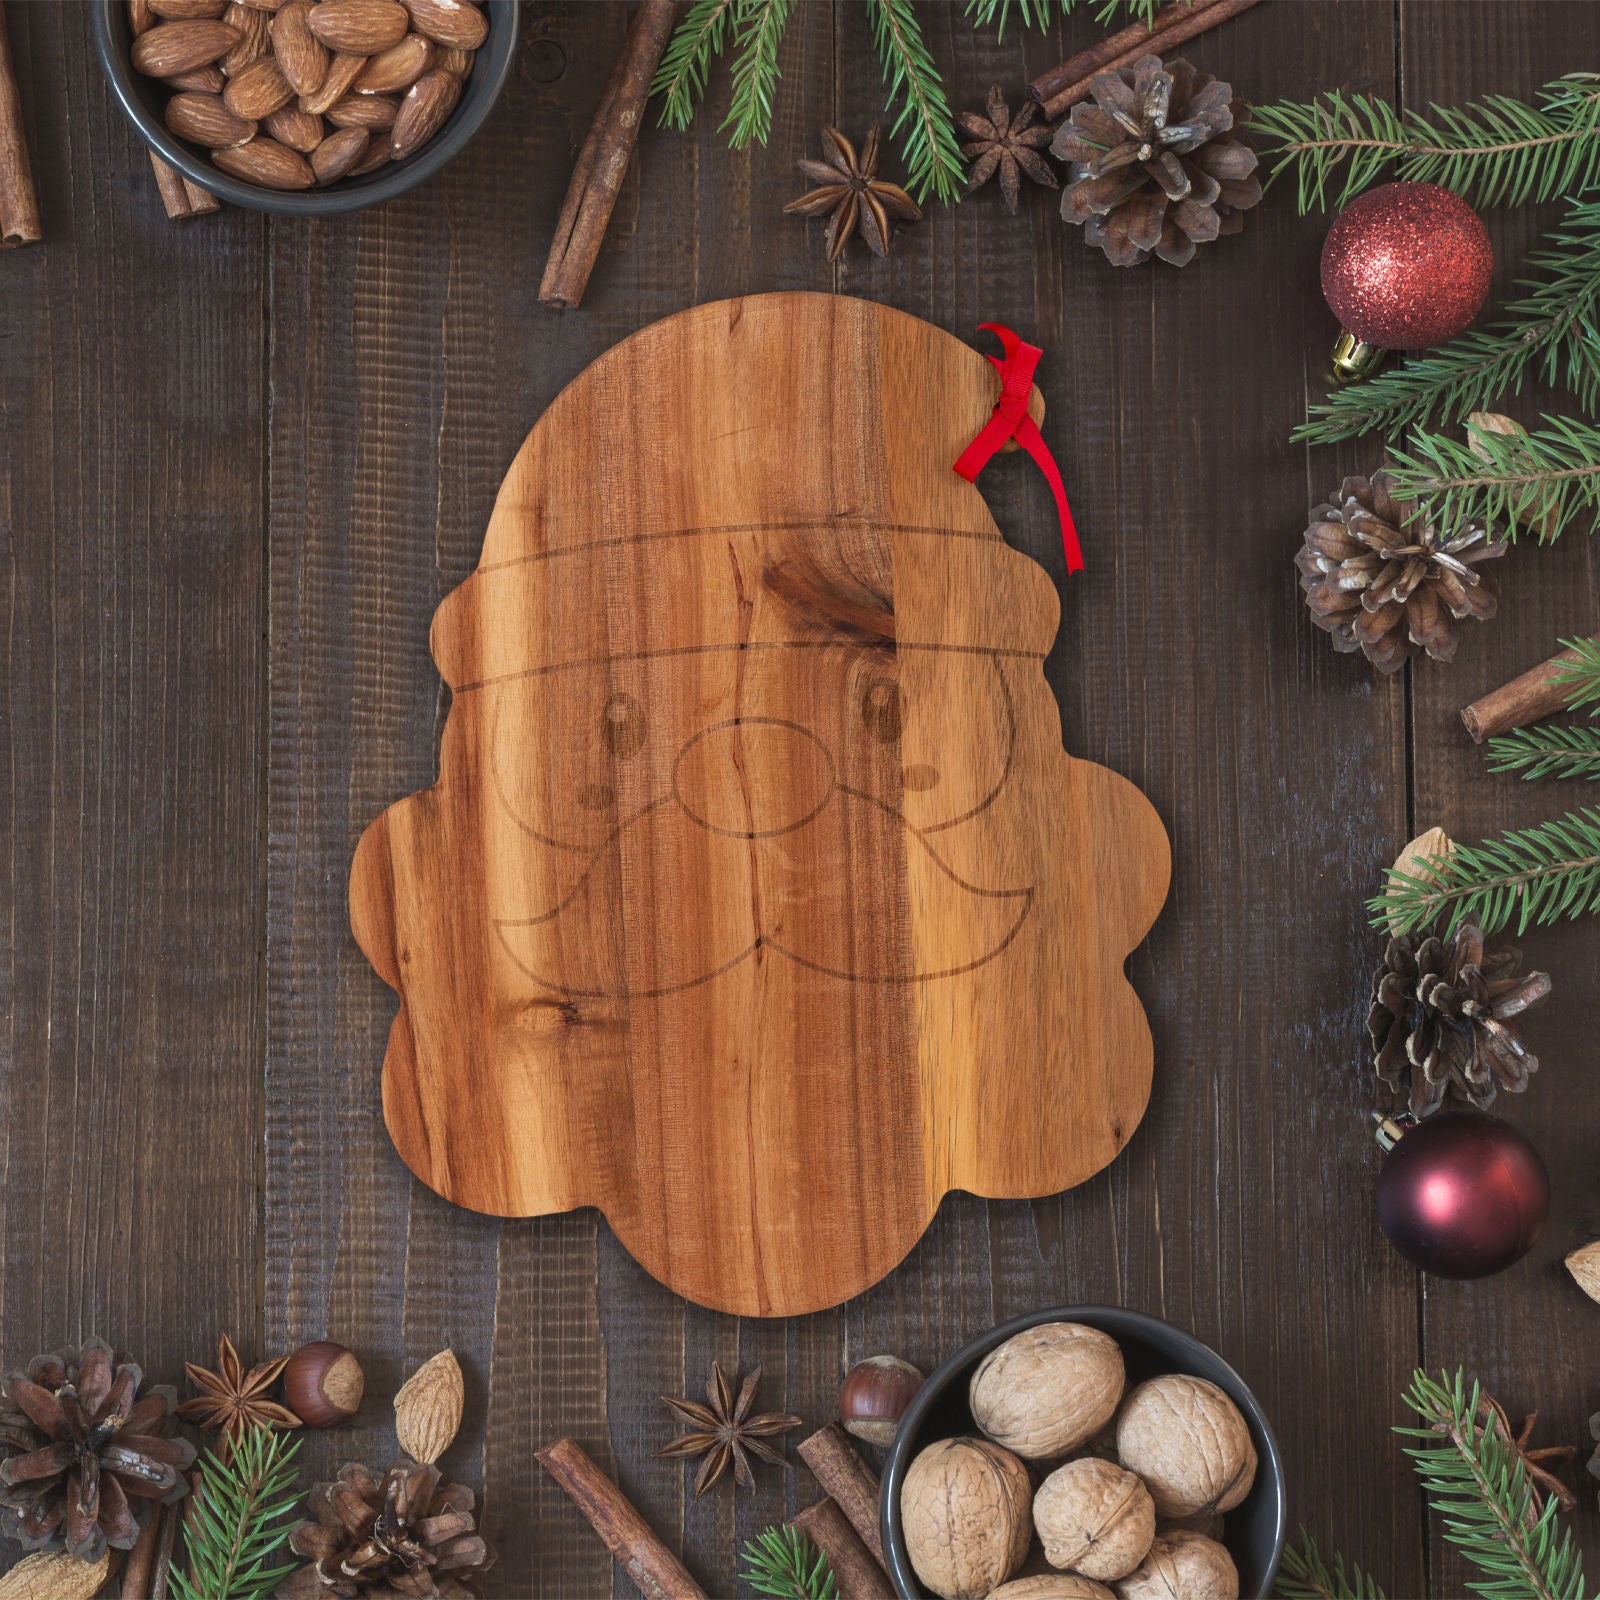 Bread and Butter Santa Face Cheese Board - - 4 Piece Set-Decorations-PEROZ Accessories